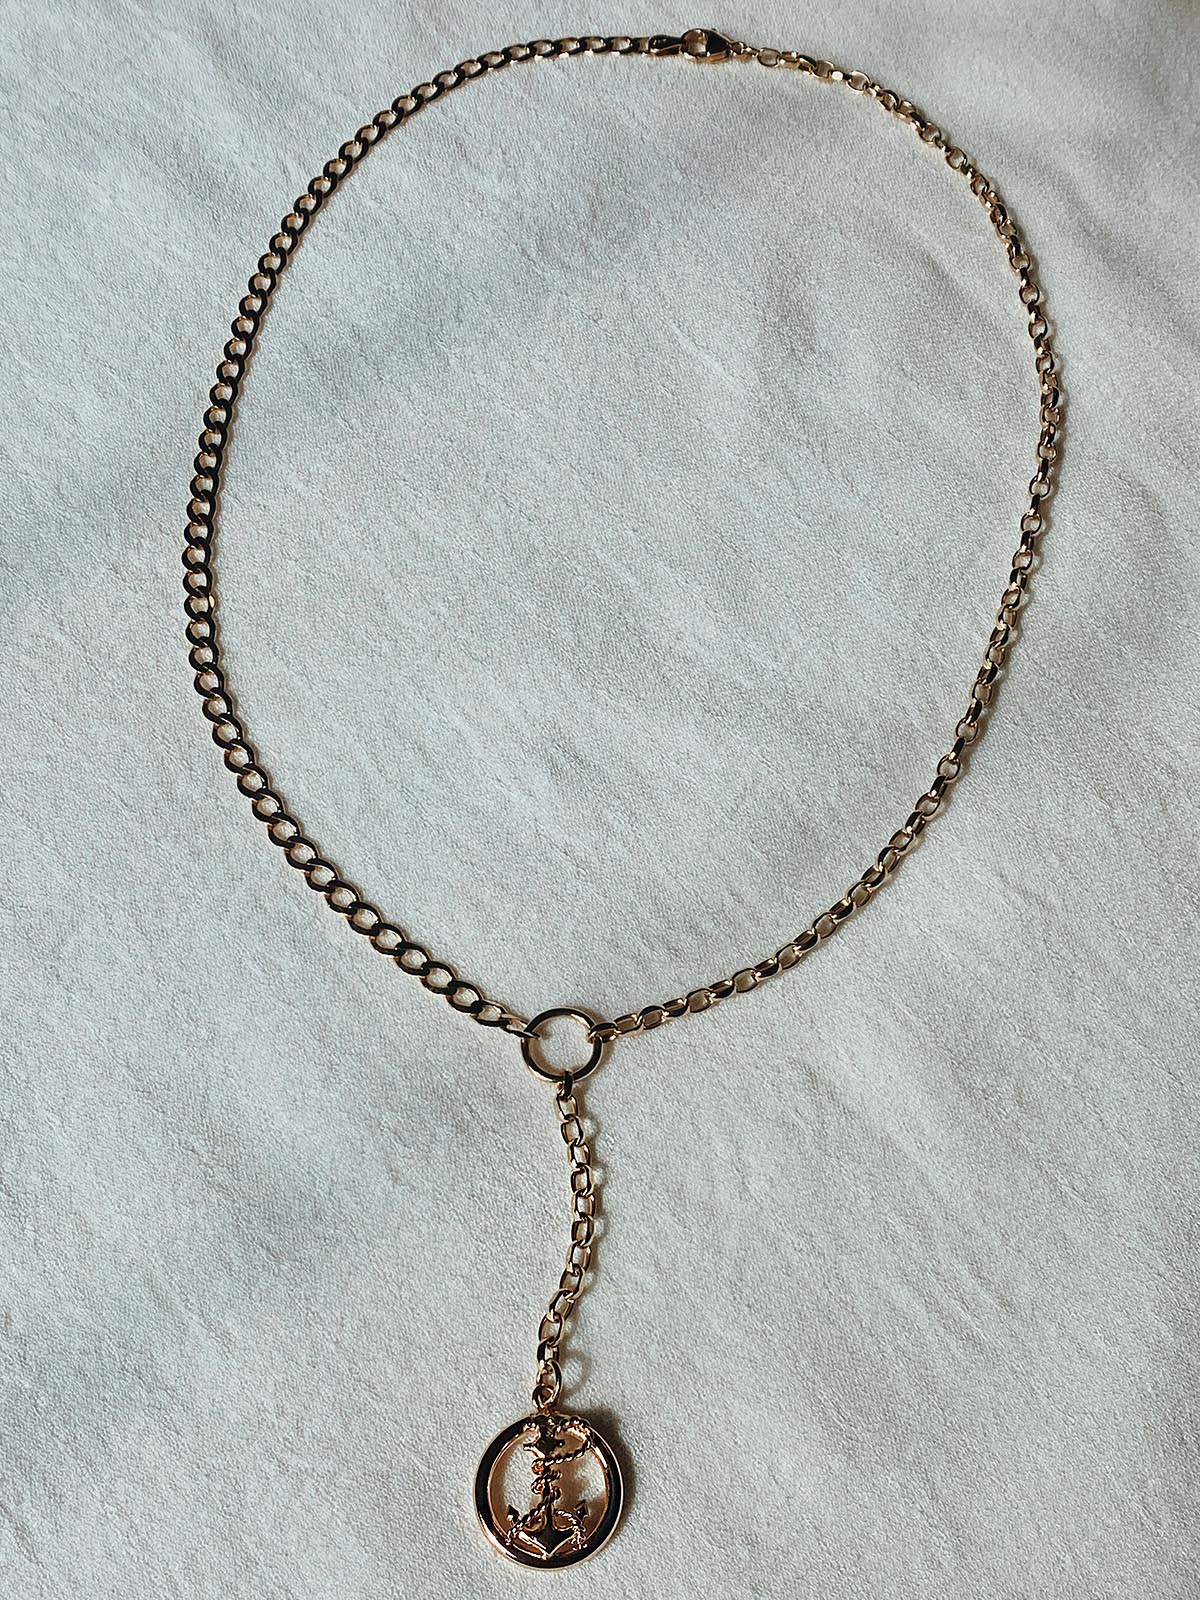 Vintage Rope & Anchor Pendant with Graduated Chain